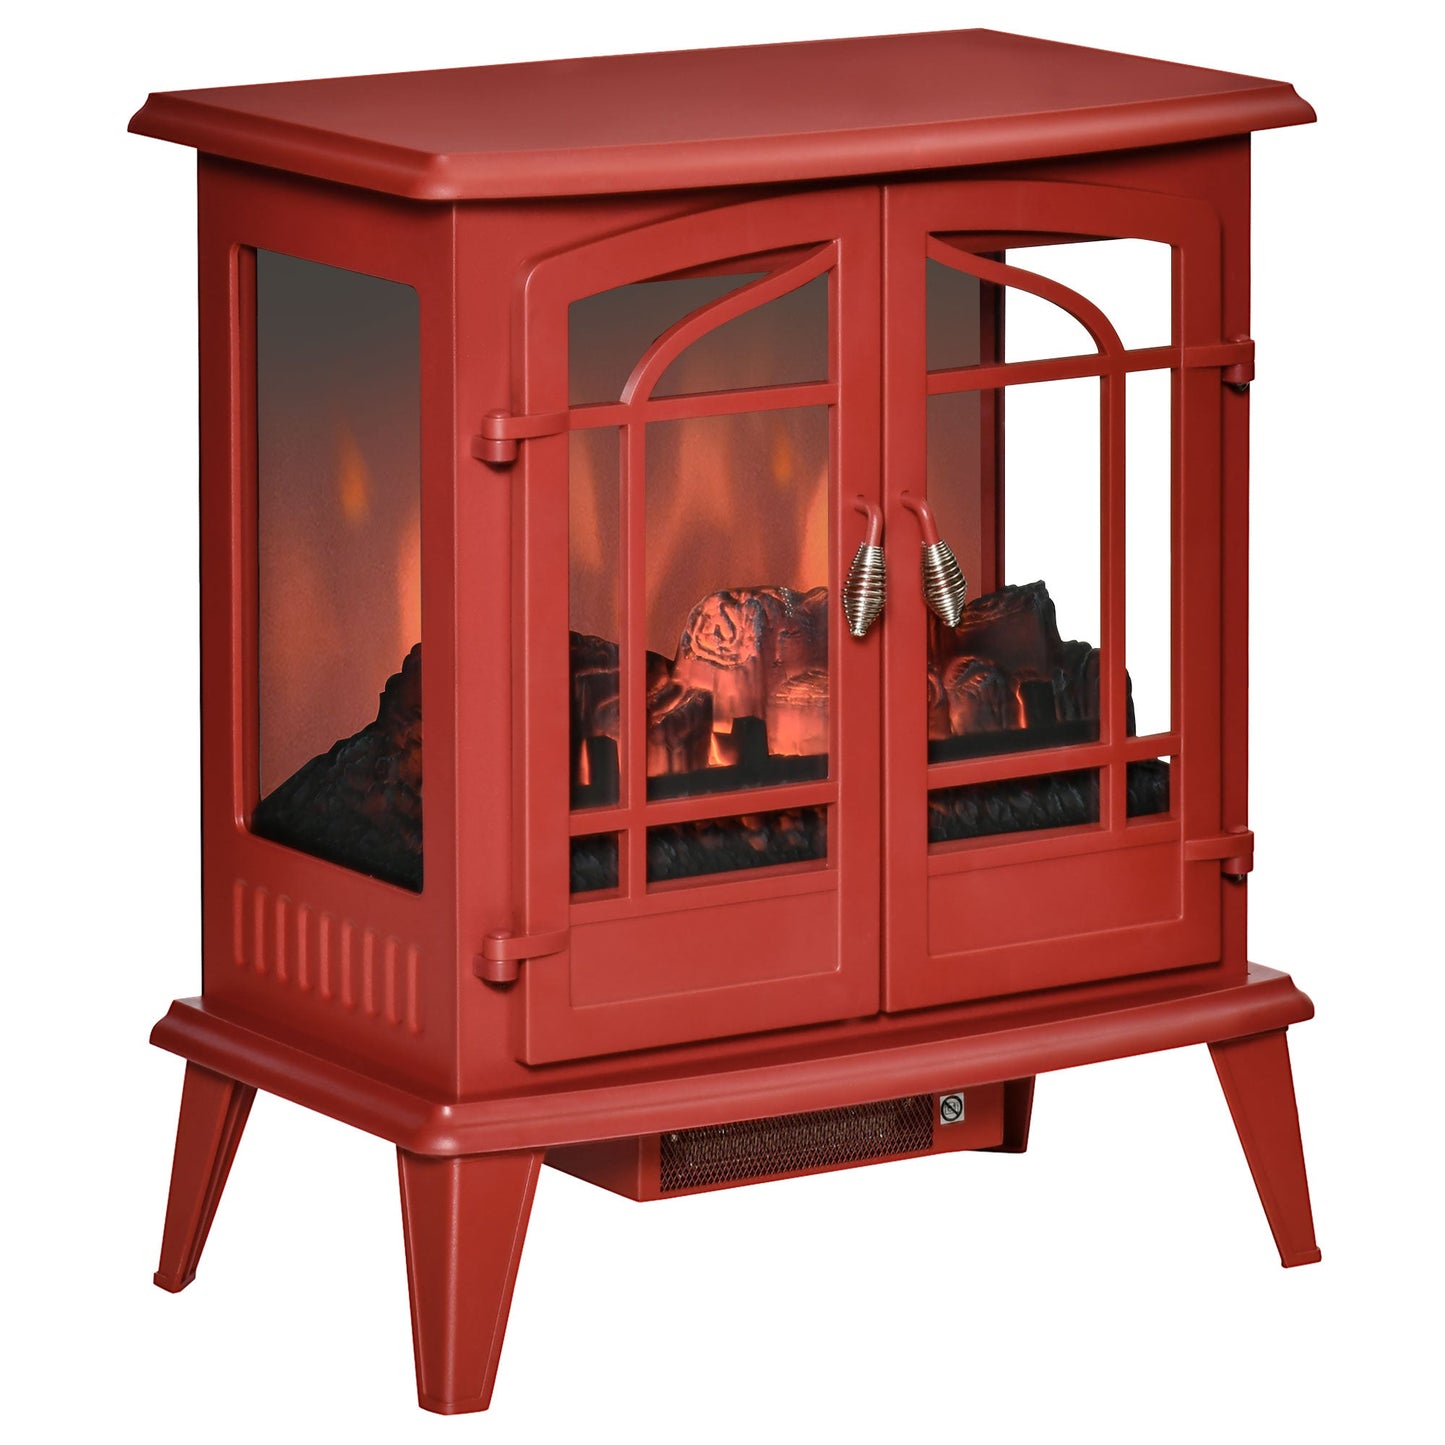 Miscellaneous-Free Standing Electric Fireplace, Freestanding Fireplace Heater with Realistic LED Log Flames and Overheating Safety Protection, 1400W, Red - Outdoor Style Company